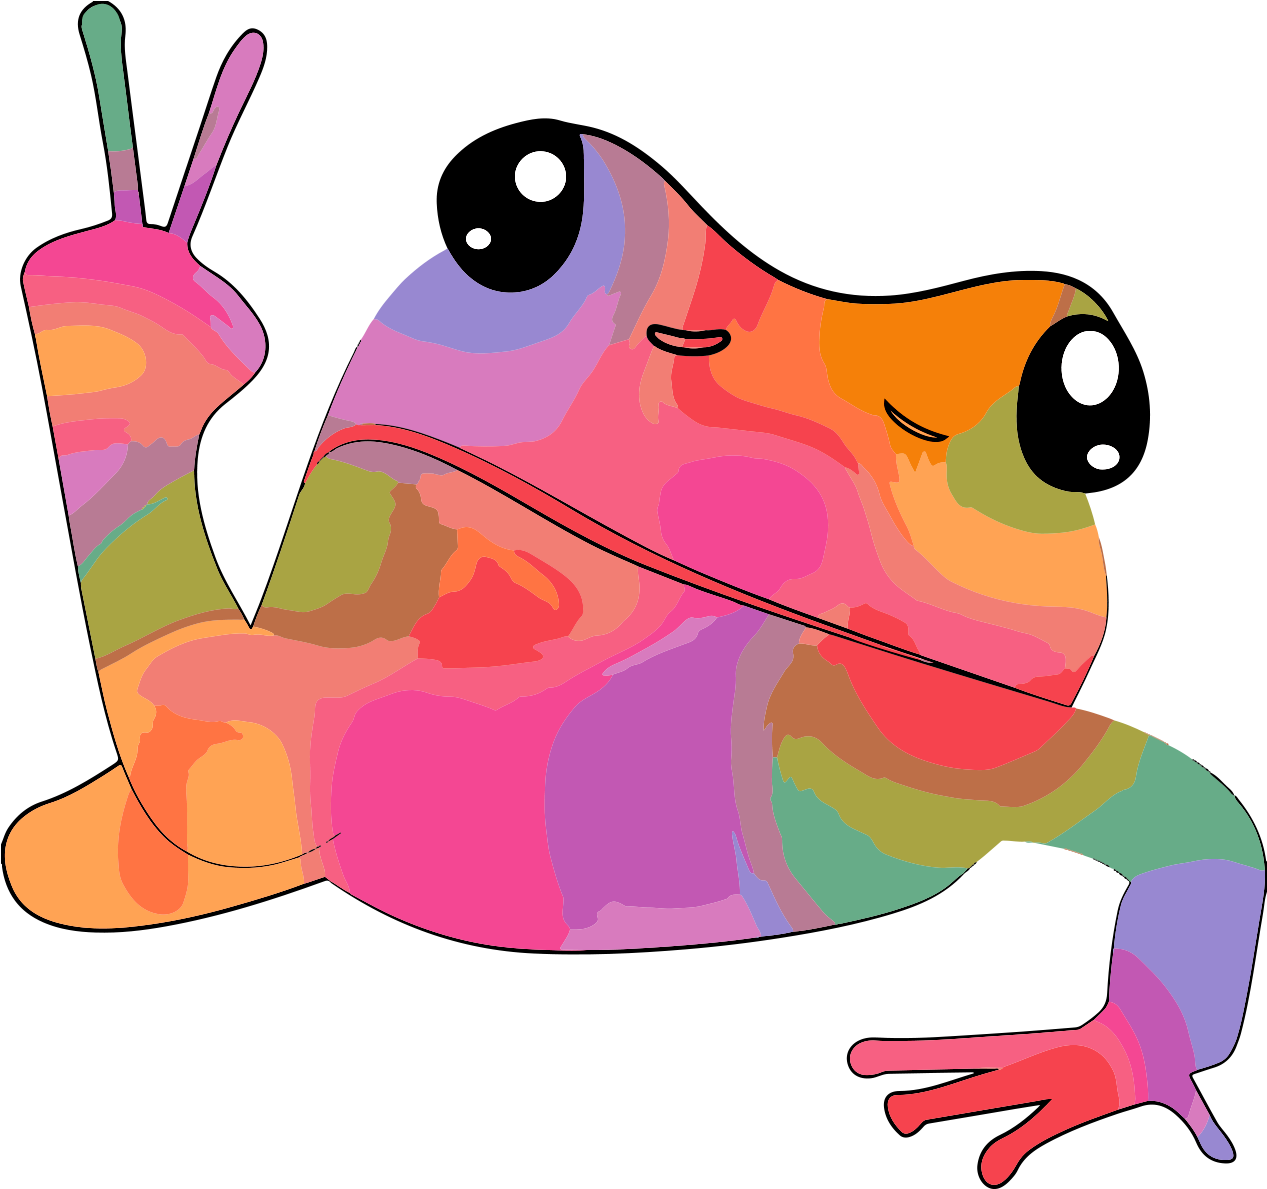 Psychedelic Tree Frog Purchase Design Here - Art (2480x3508)